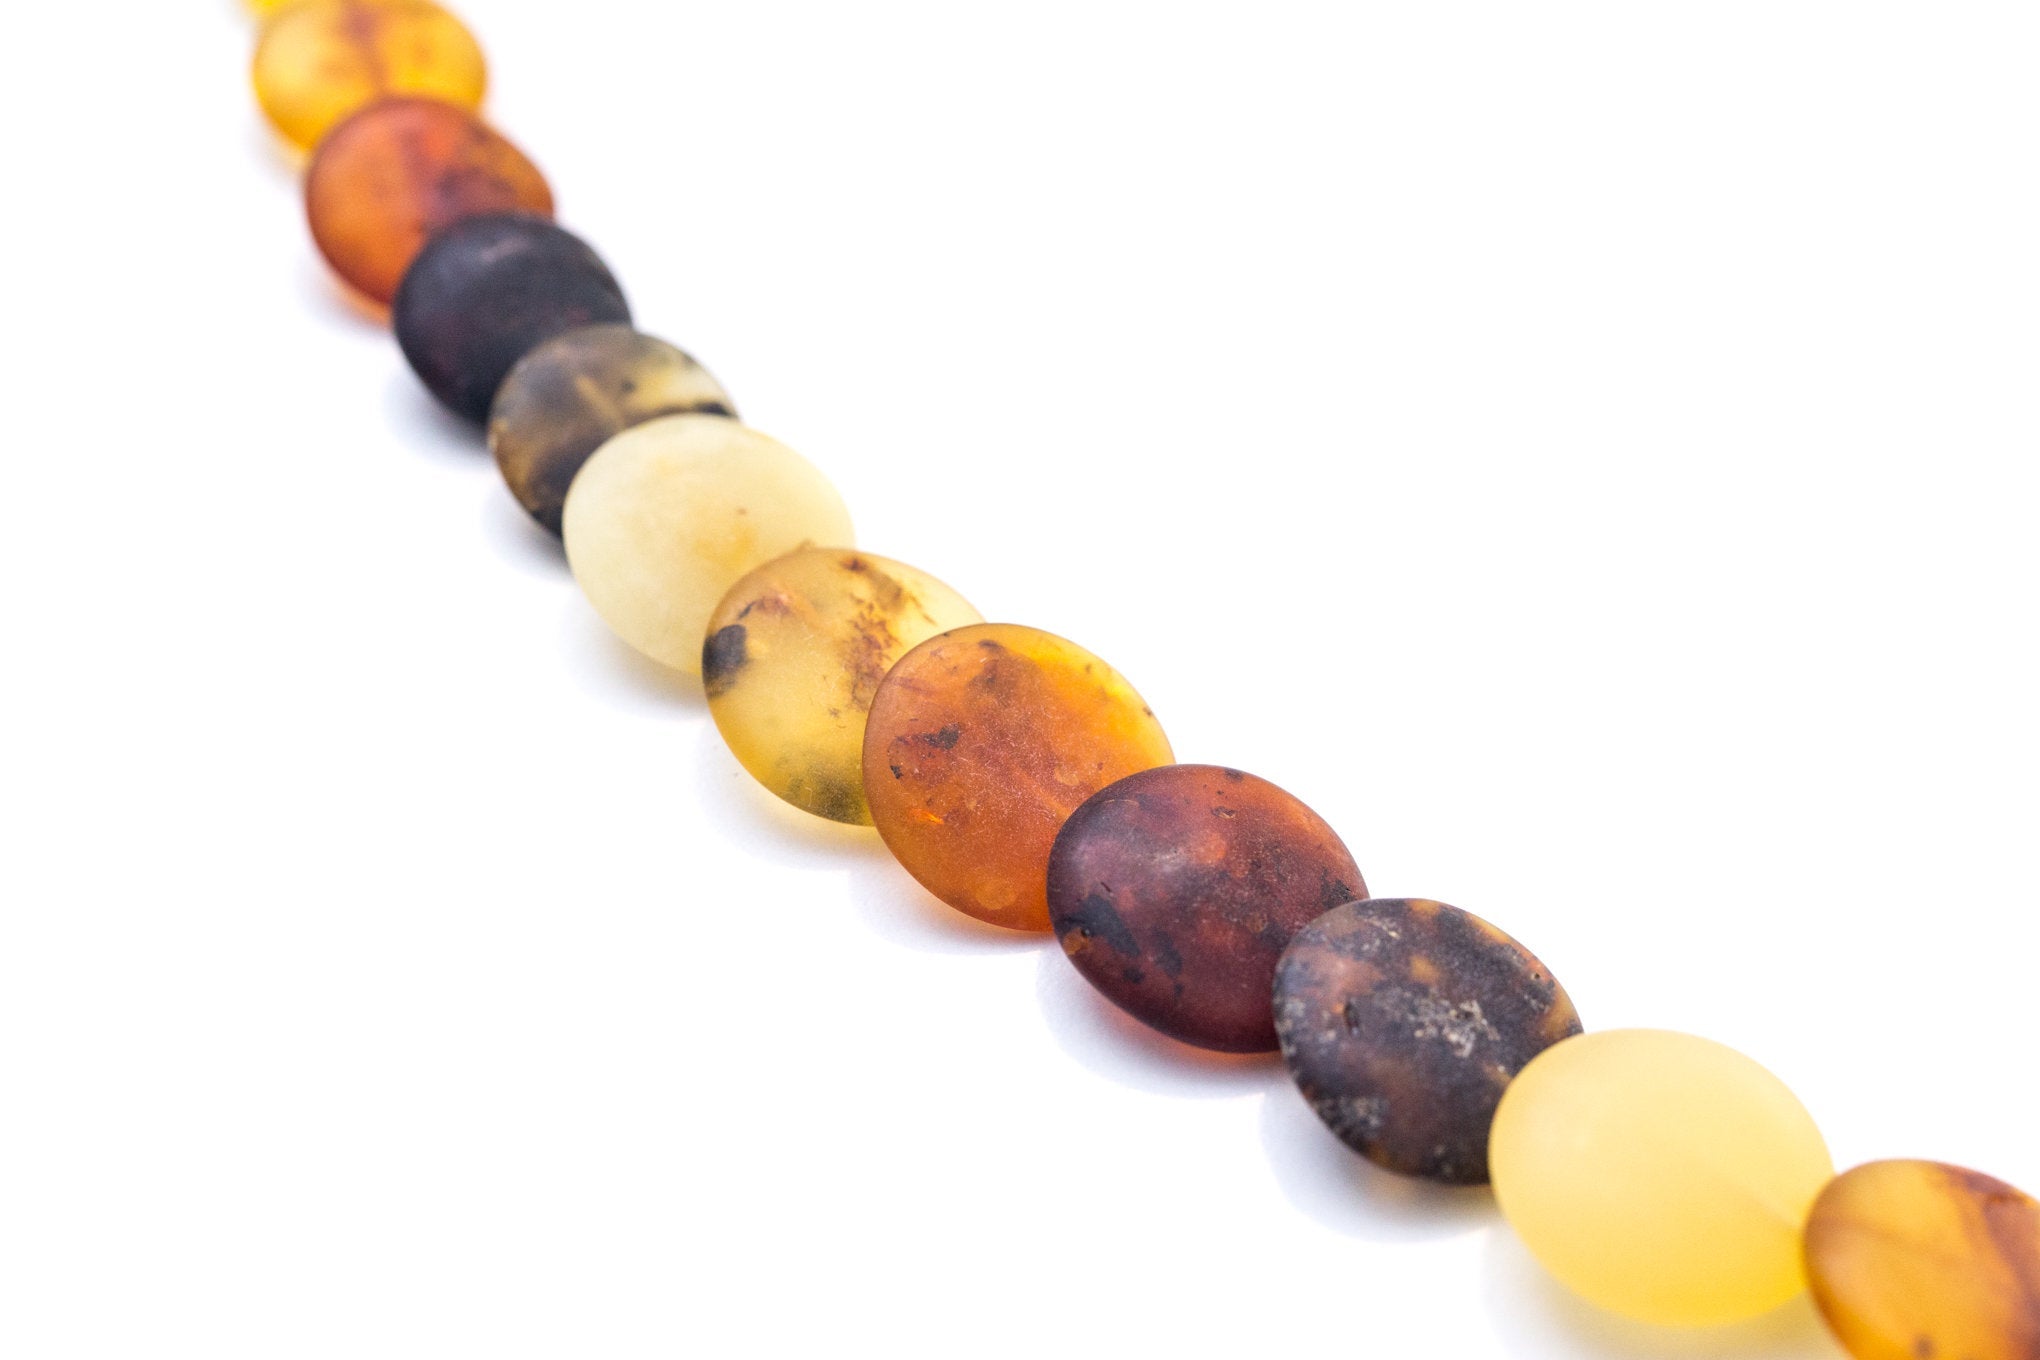 Colourful Amber Necklace - Round Amber Bead Necklace- Necklaces- Baltic Beauty